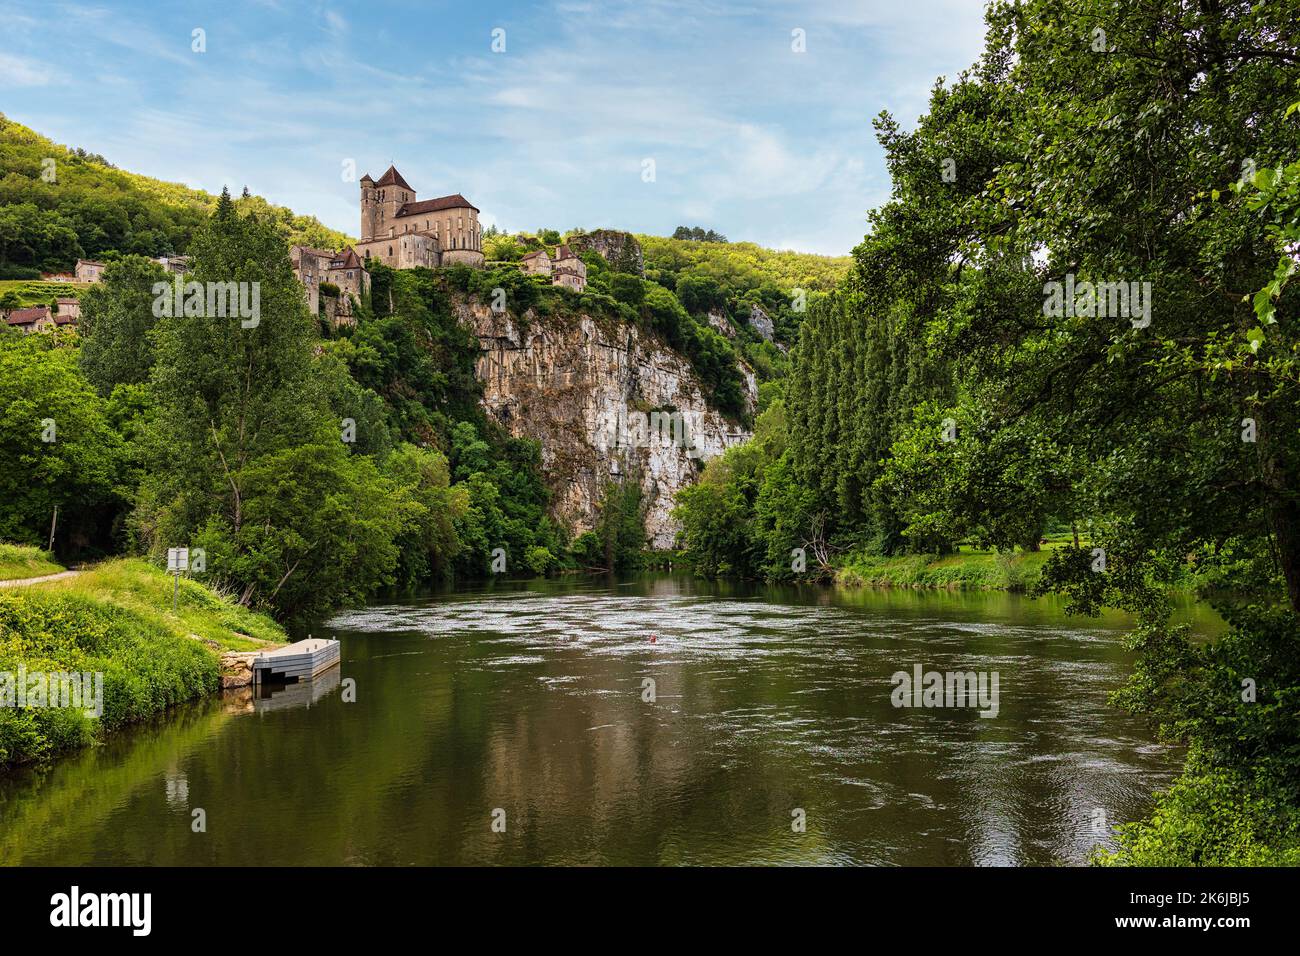 The Lot river and the Saint Cyr Lapopie village at the top of the cliff, France Stock Photo